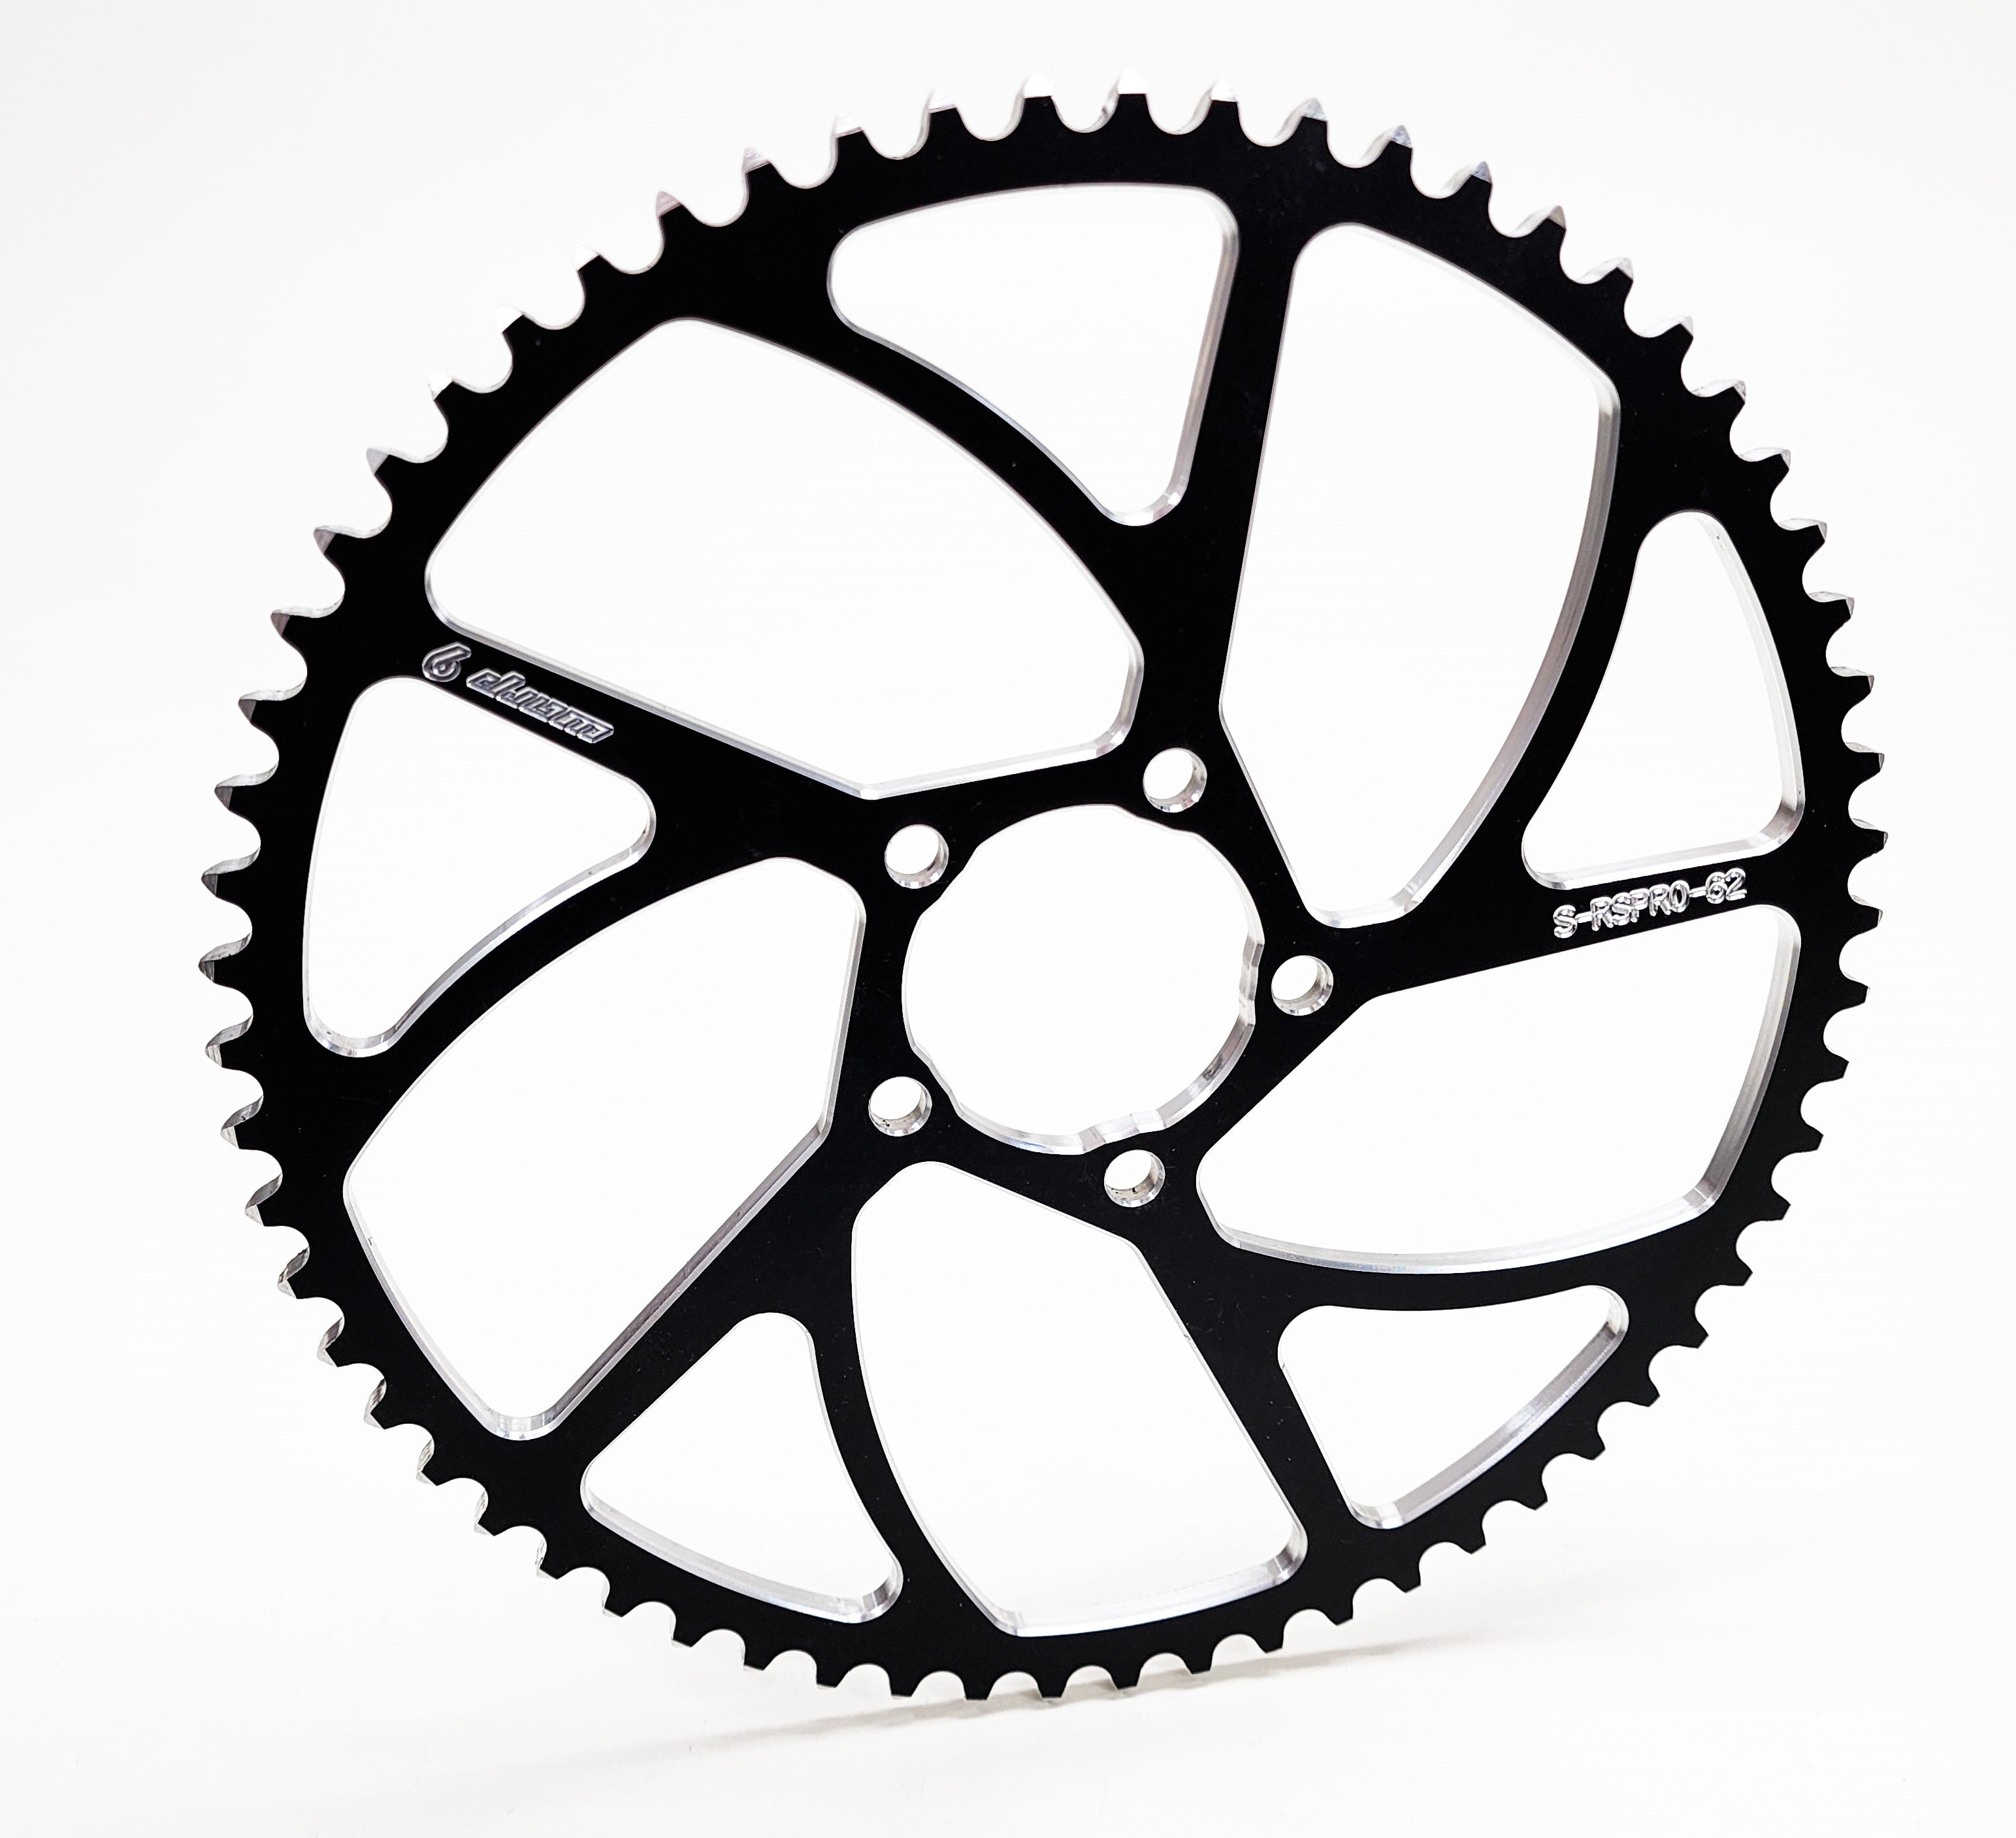 Warp 9 62 tooth sprocket for Surron Lightbee X and Talaria Sting